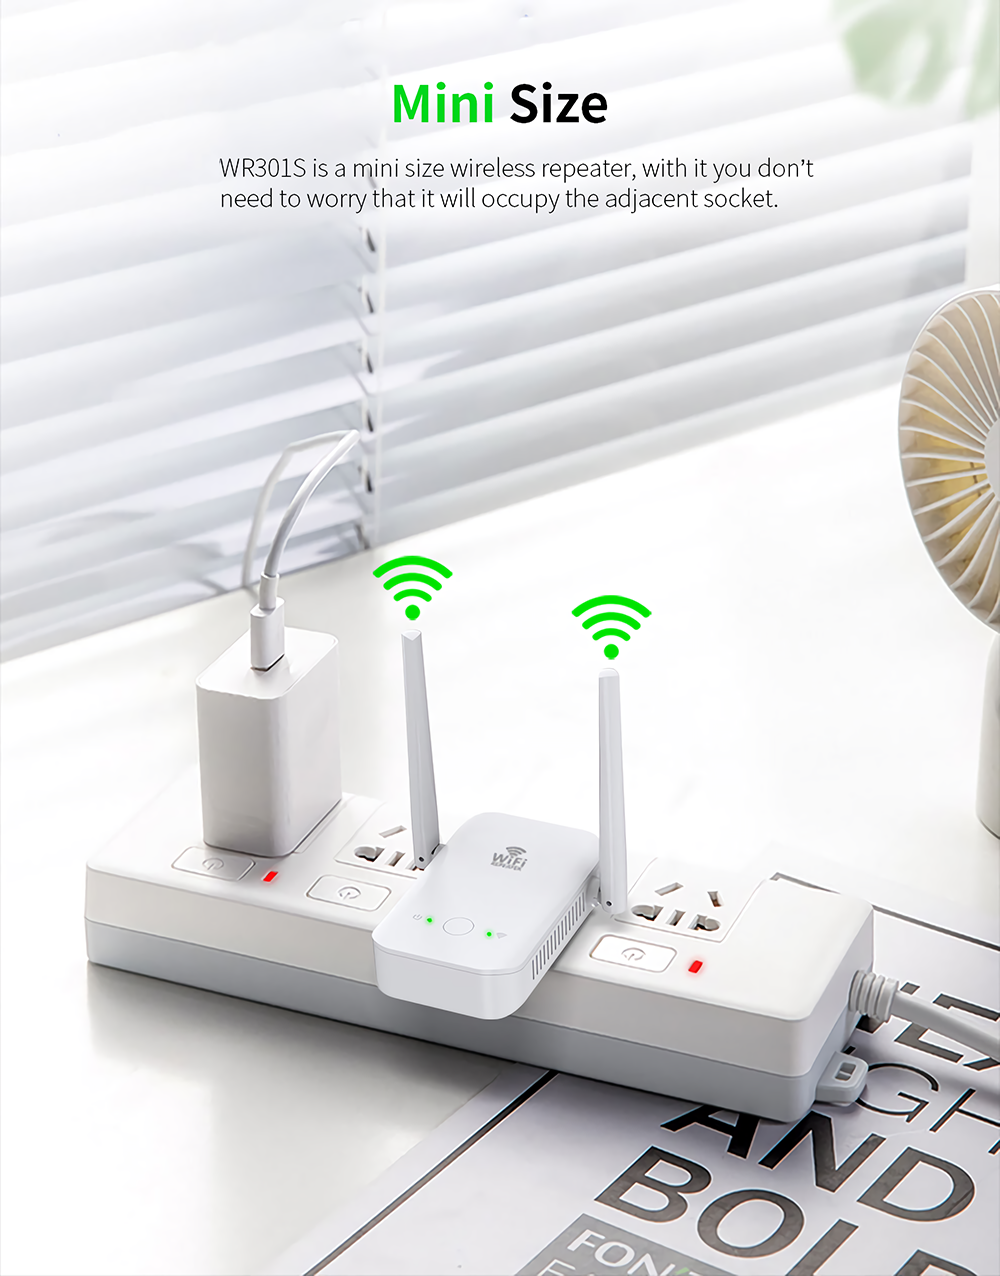 300Mbps-Wireless-Repeater-Wifi-Range-Extender-23dBi-Amplifier-24GHz-WiFi-Signal-Booster-WR301S-1811914-3